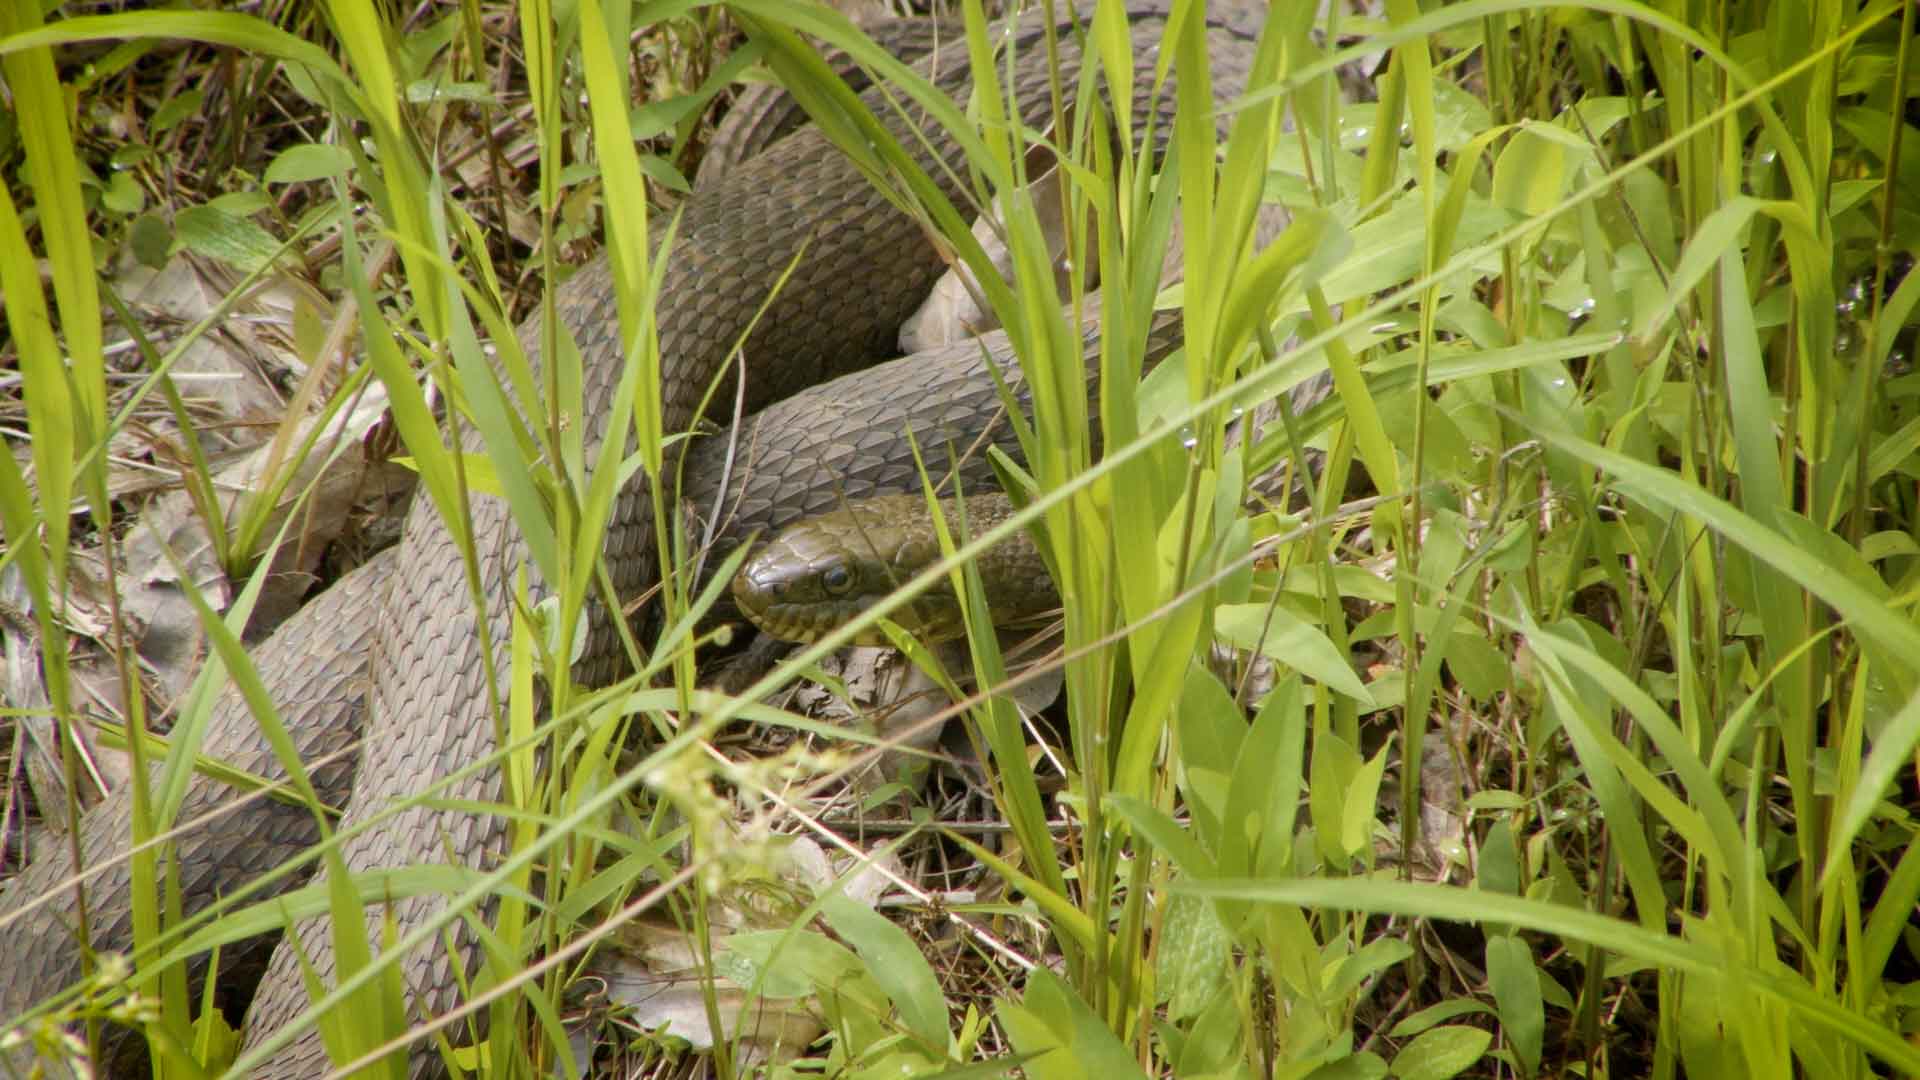 water snake laying in grass